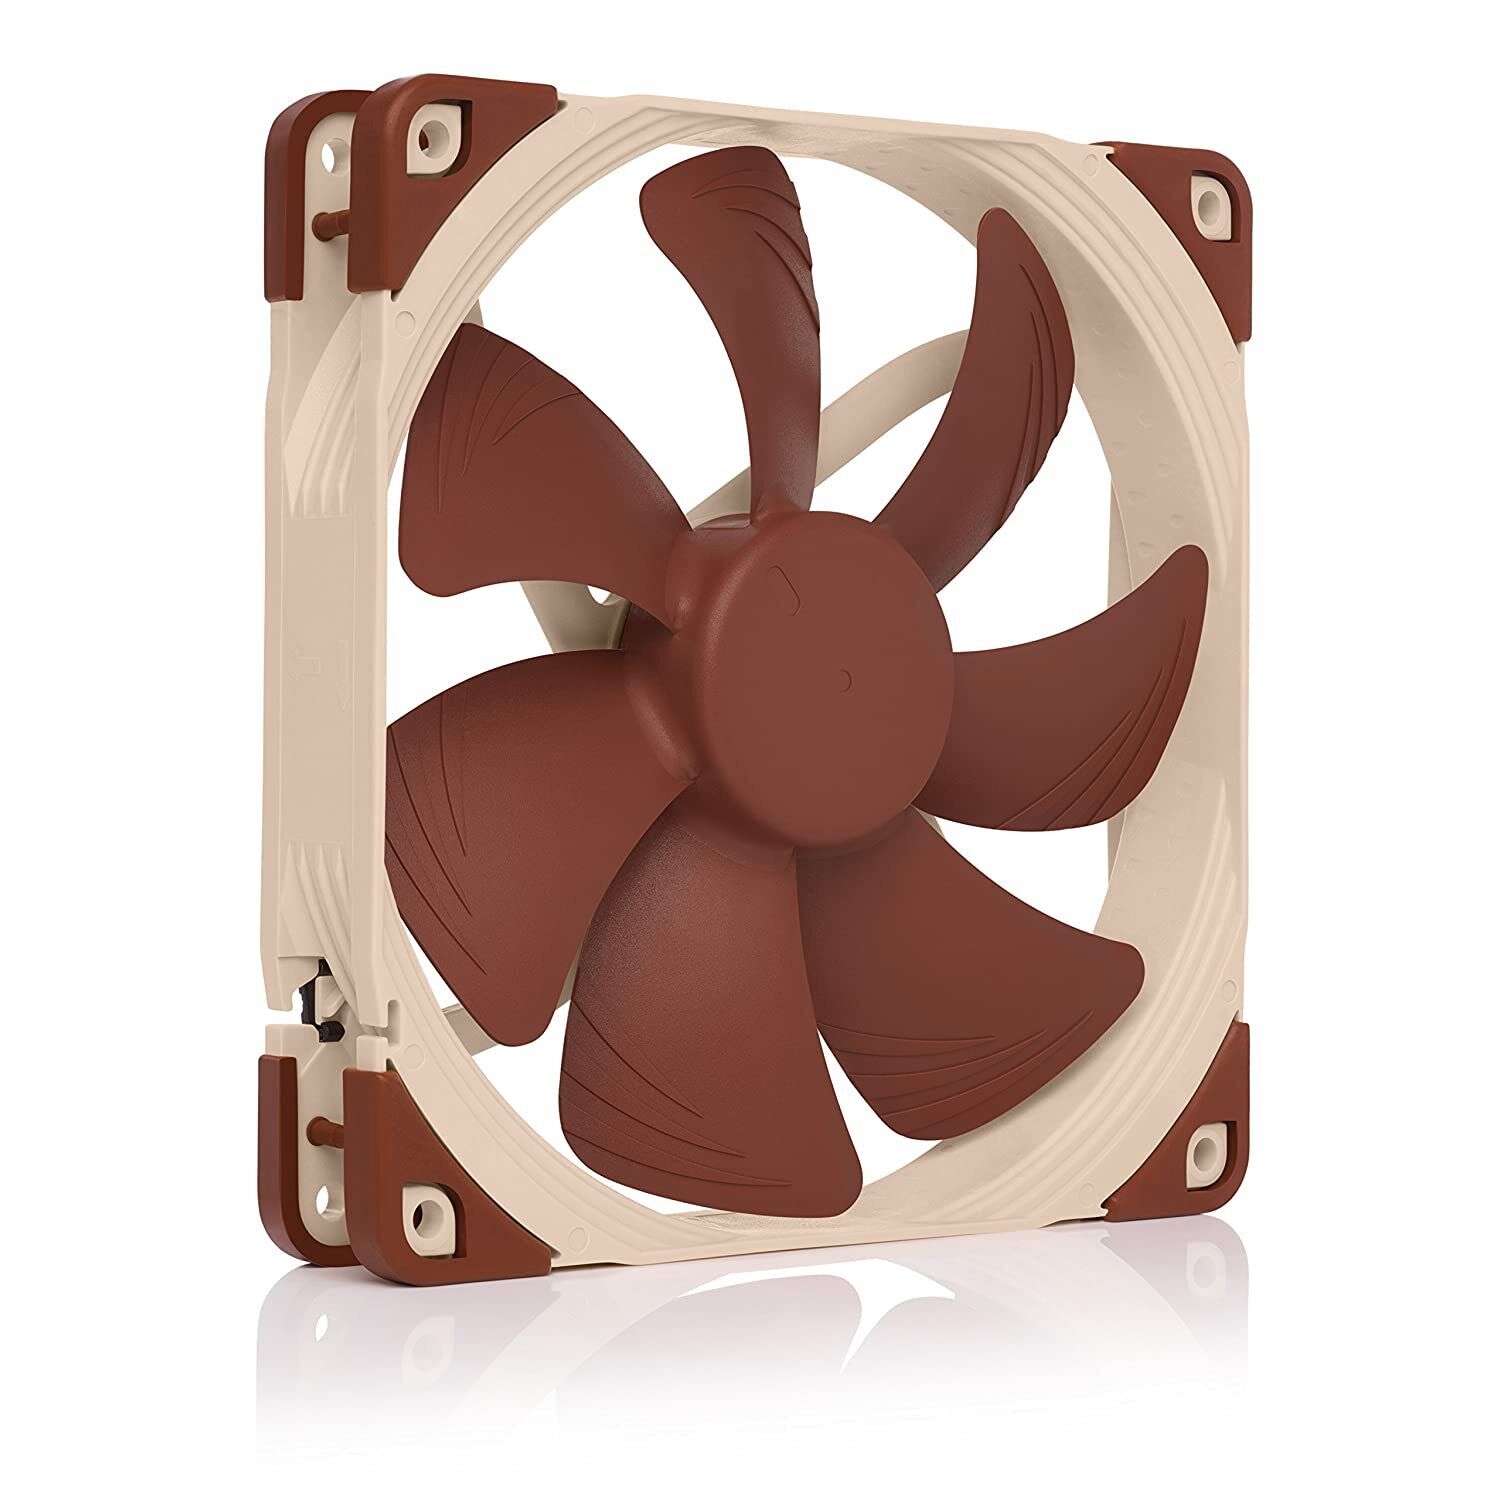 Noctua NF-A14 5V, Premium Quiet Fan with USB Power Adaptor Cable, 3-Pin, 5V Ve